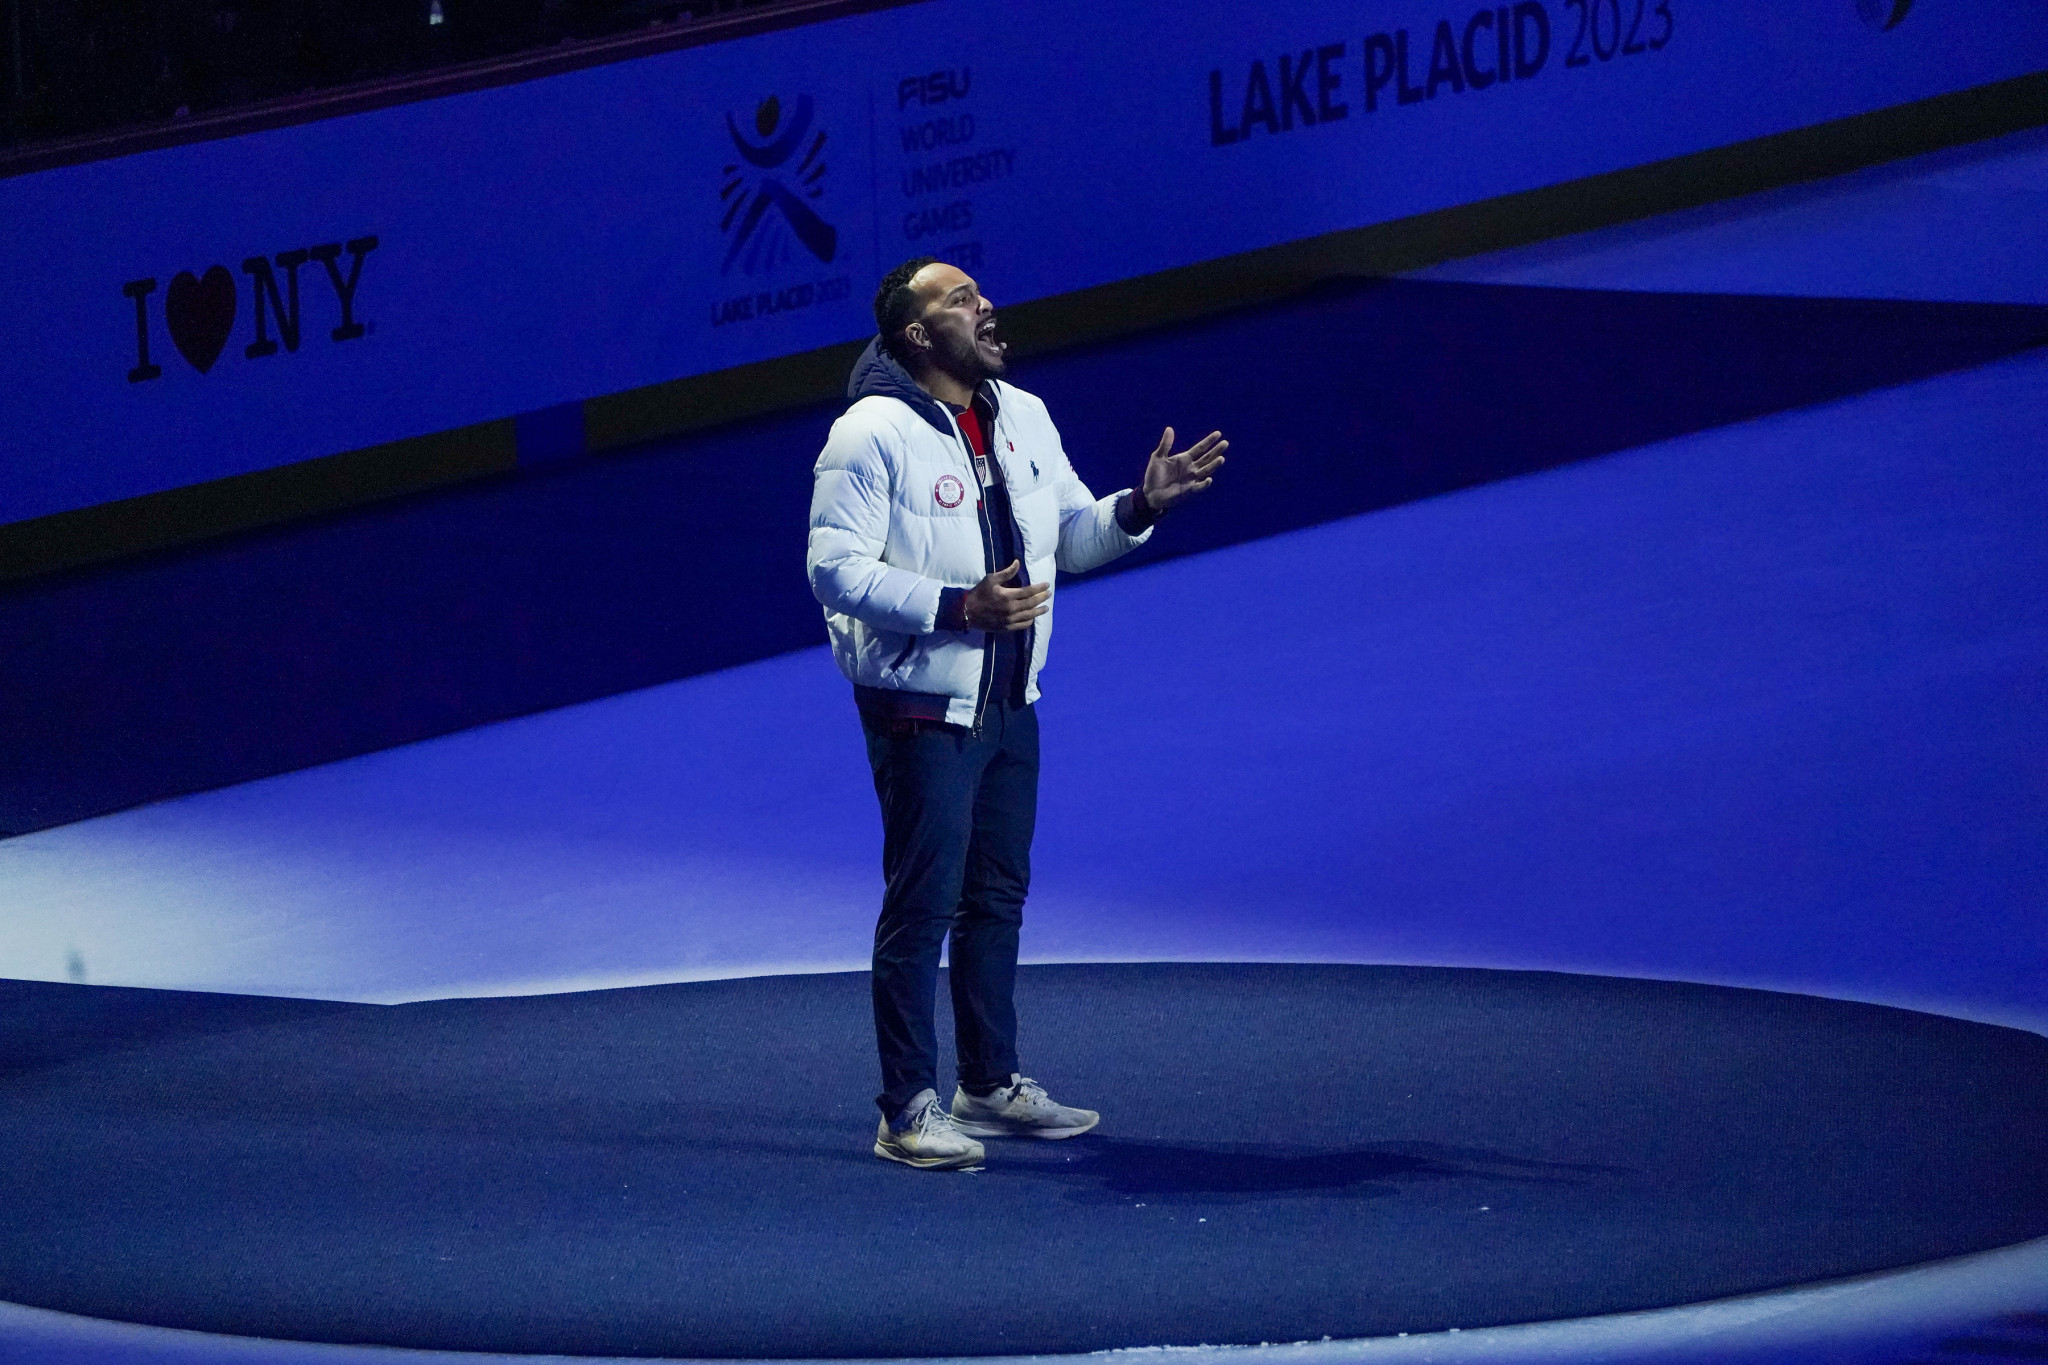 United States Olympic bobsledder from Pyeongchang 2018 Christopher Kinney produced a rousing performance of the host country's national anthem ©FISU